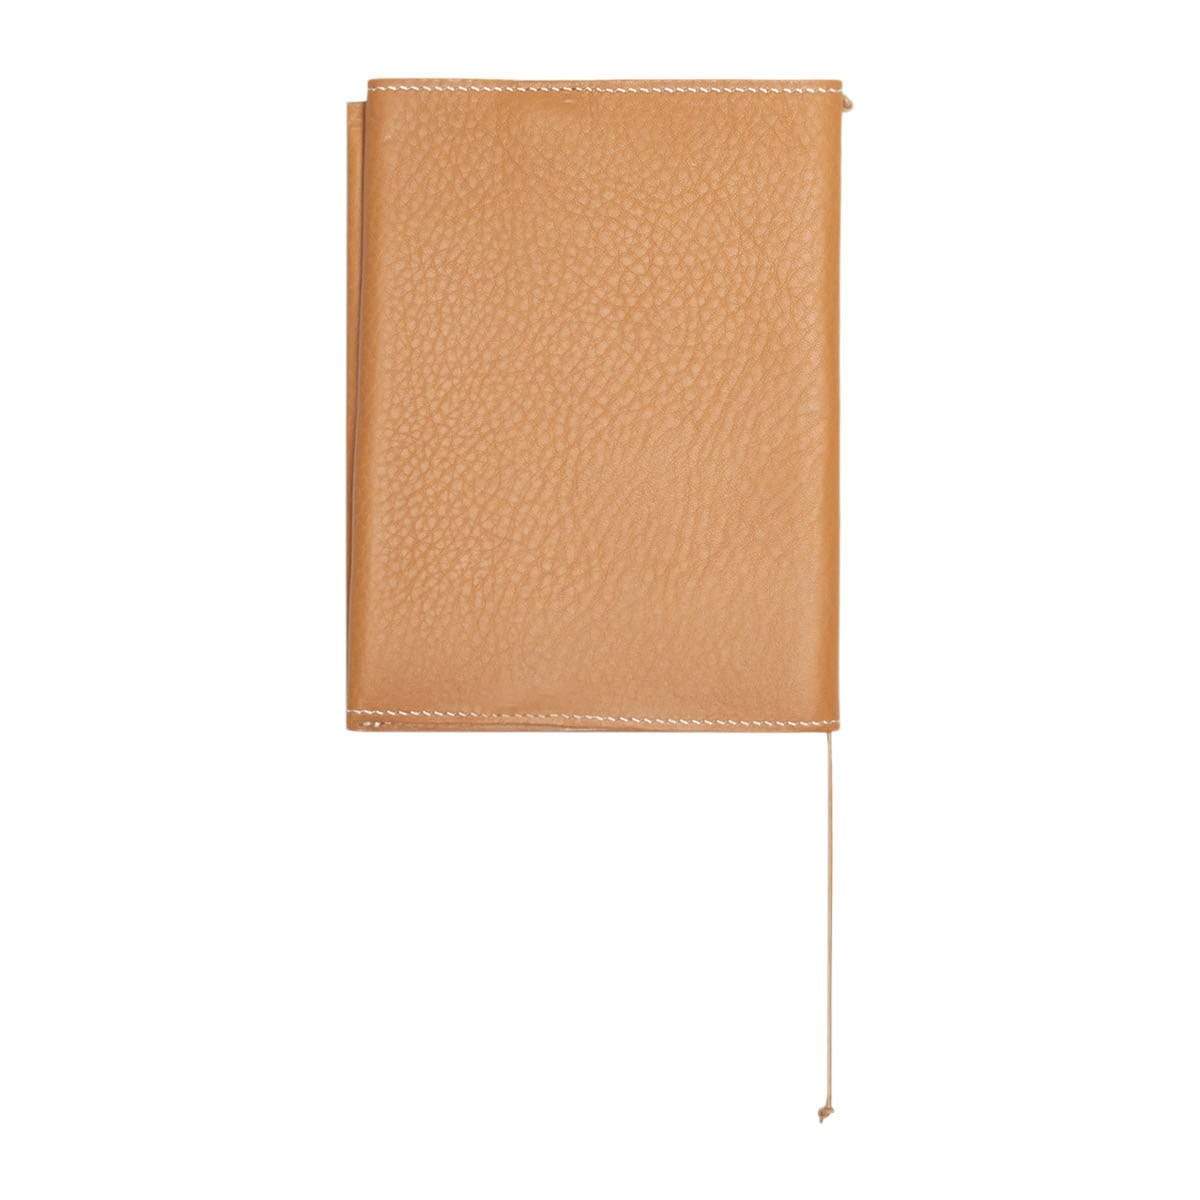 Hender Scheme Wallets & Cases NATURAL / O/S BOOK COVER